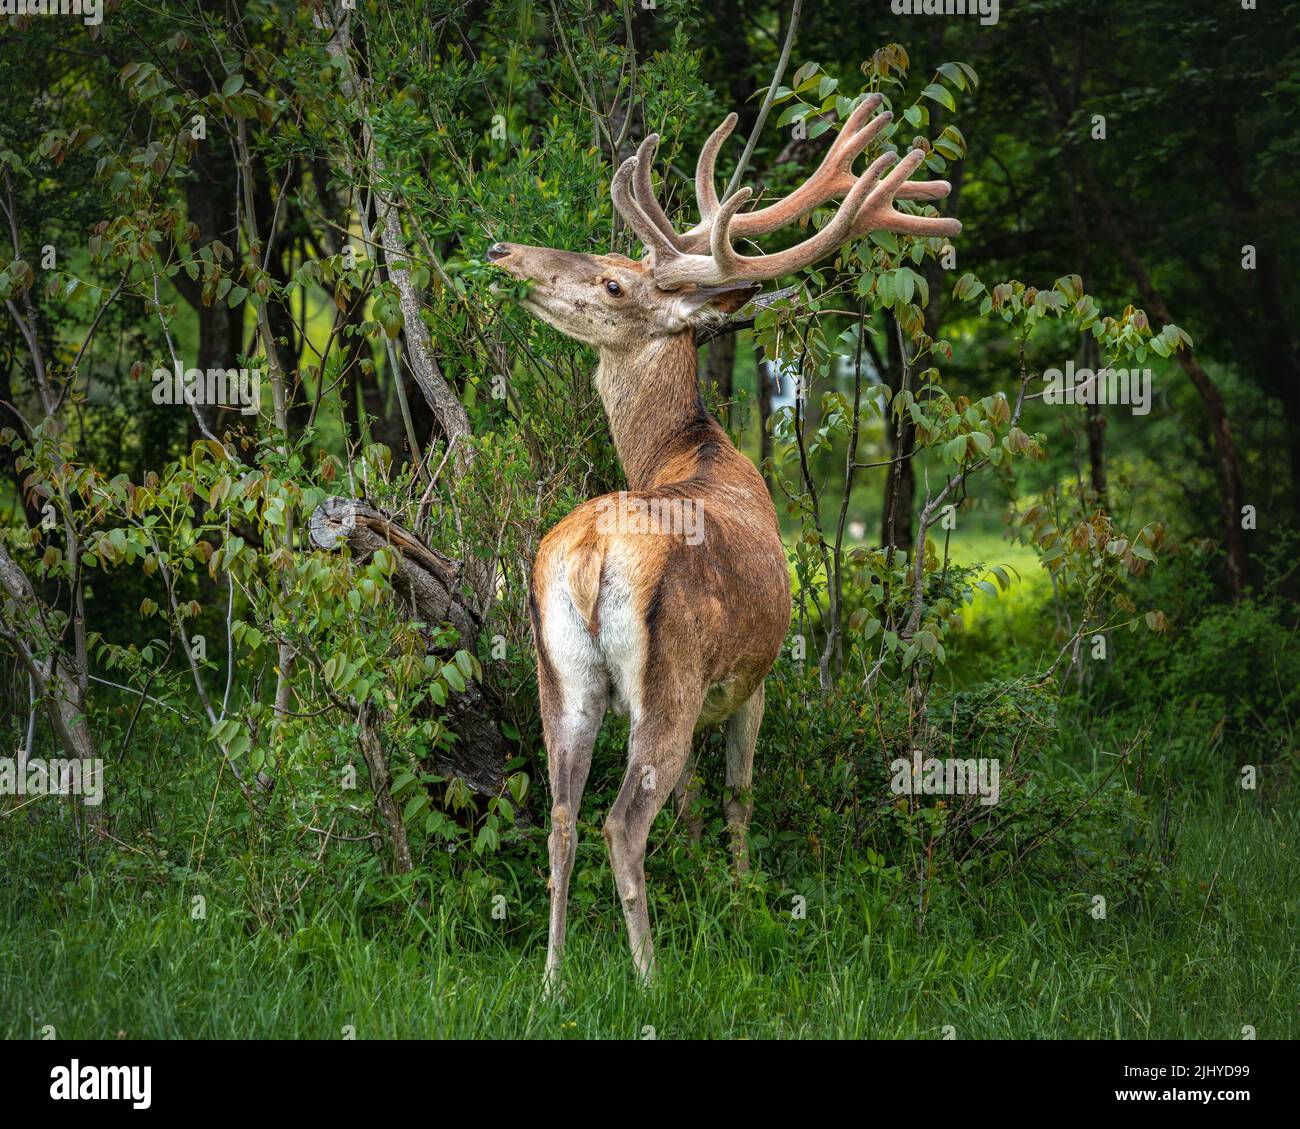 Adult deer eats the tender shoots of a plant. National park of Abruzzo Lazio and Molise, Abruzzo, Italy, Europe Stock Photo